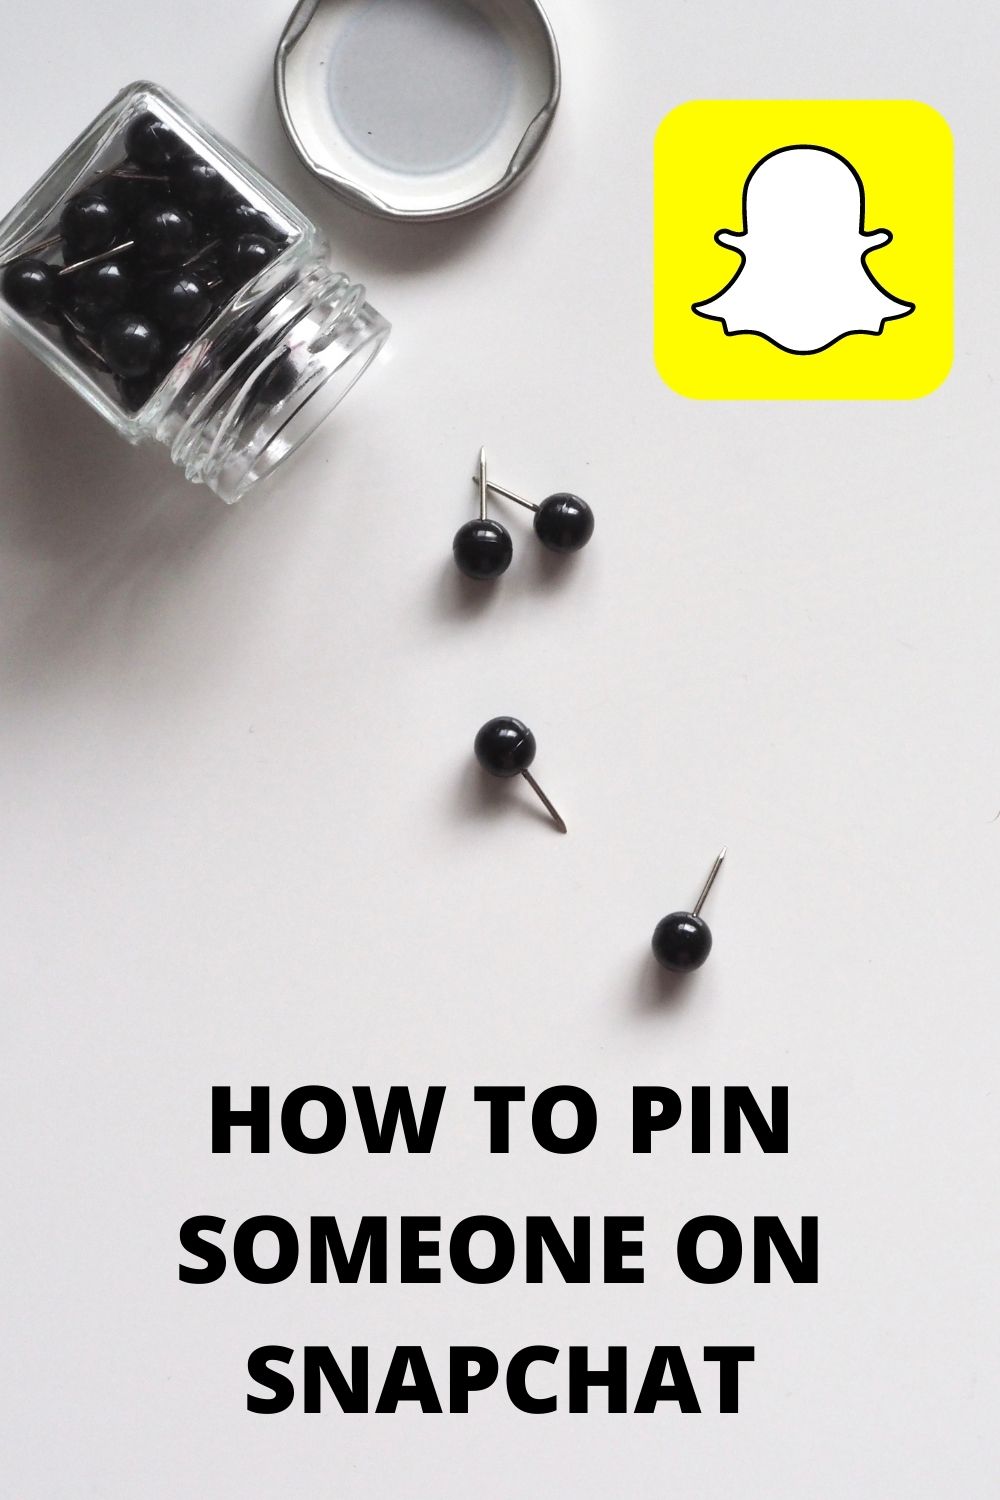 How to unpin someone on snapchat that blocked you